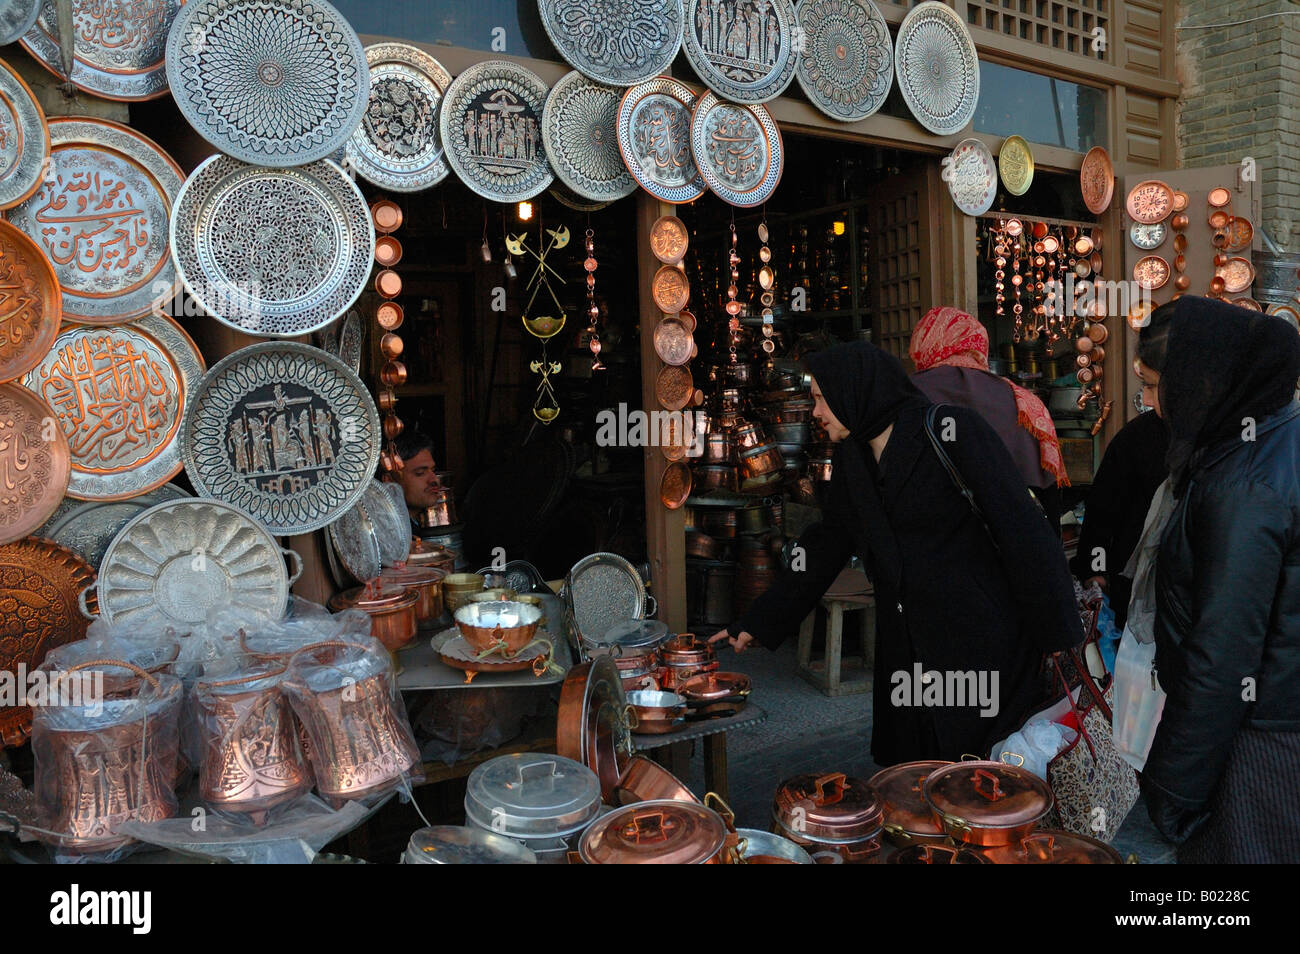 Shop with copper enameled plates in Esfahan, Iran. Stock Photo